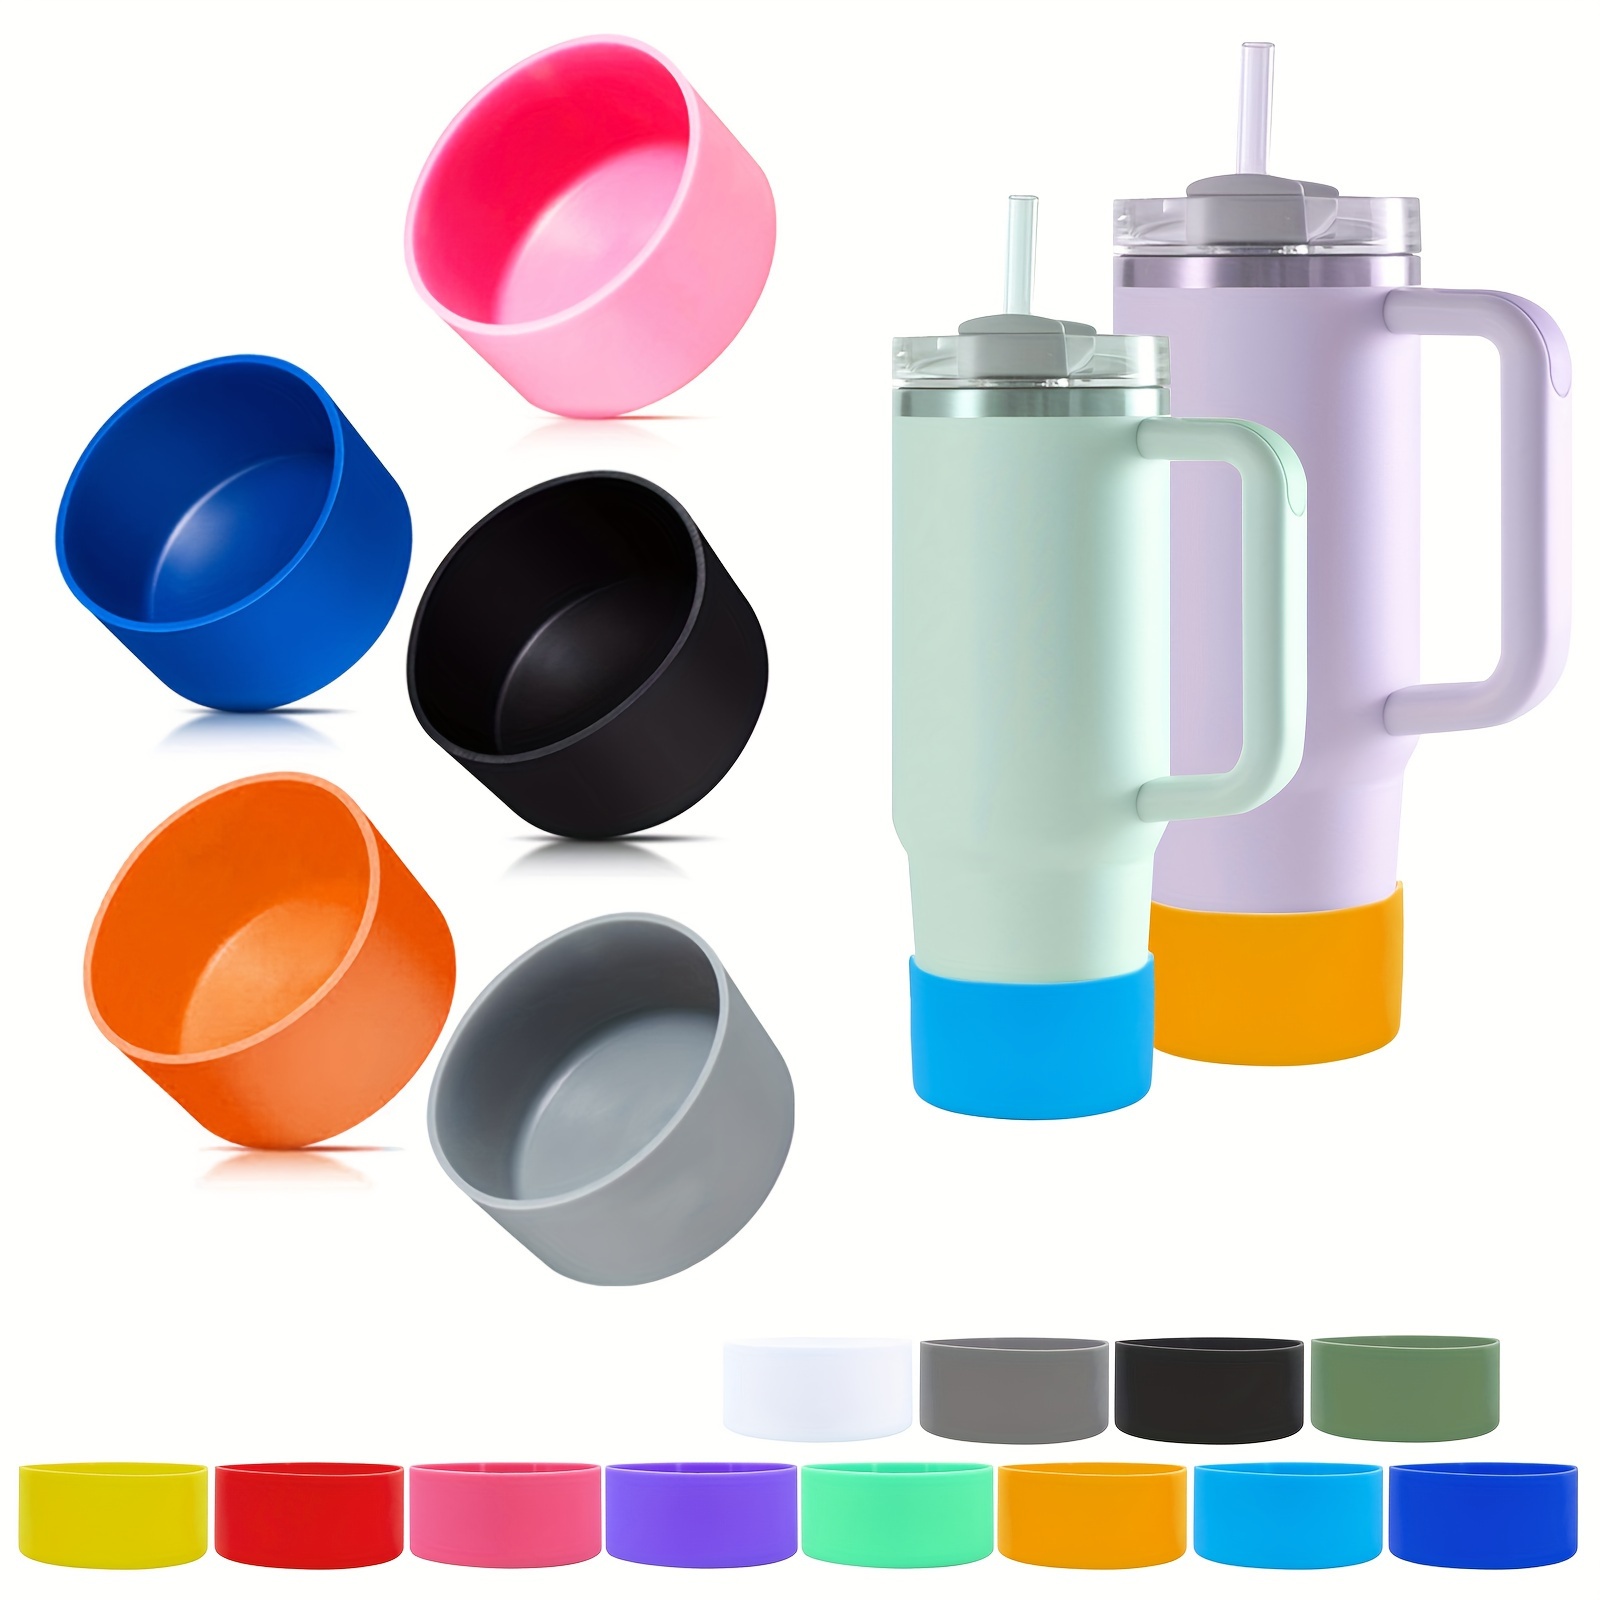 7.5cm Silicone Boot Bottom Sleeve Cover for Stanley 40oz Tumbler Quencher  Adventure and Ice Flow Flip 30 oz 20 oz Water Bottle